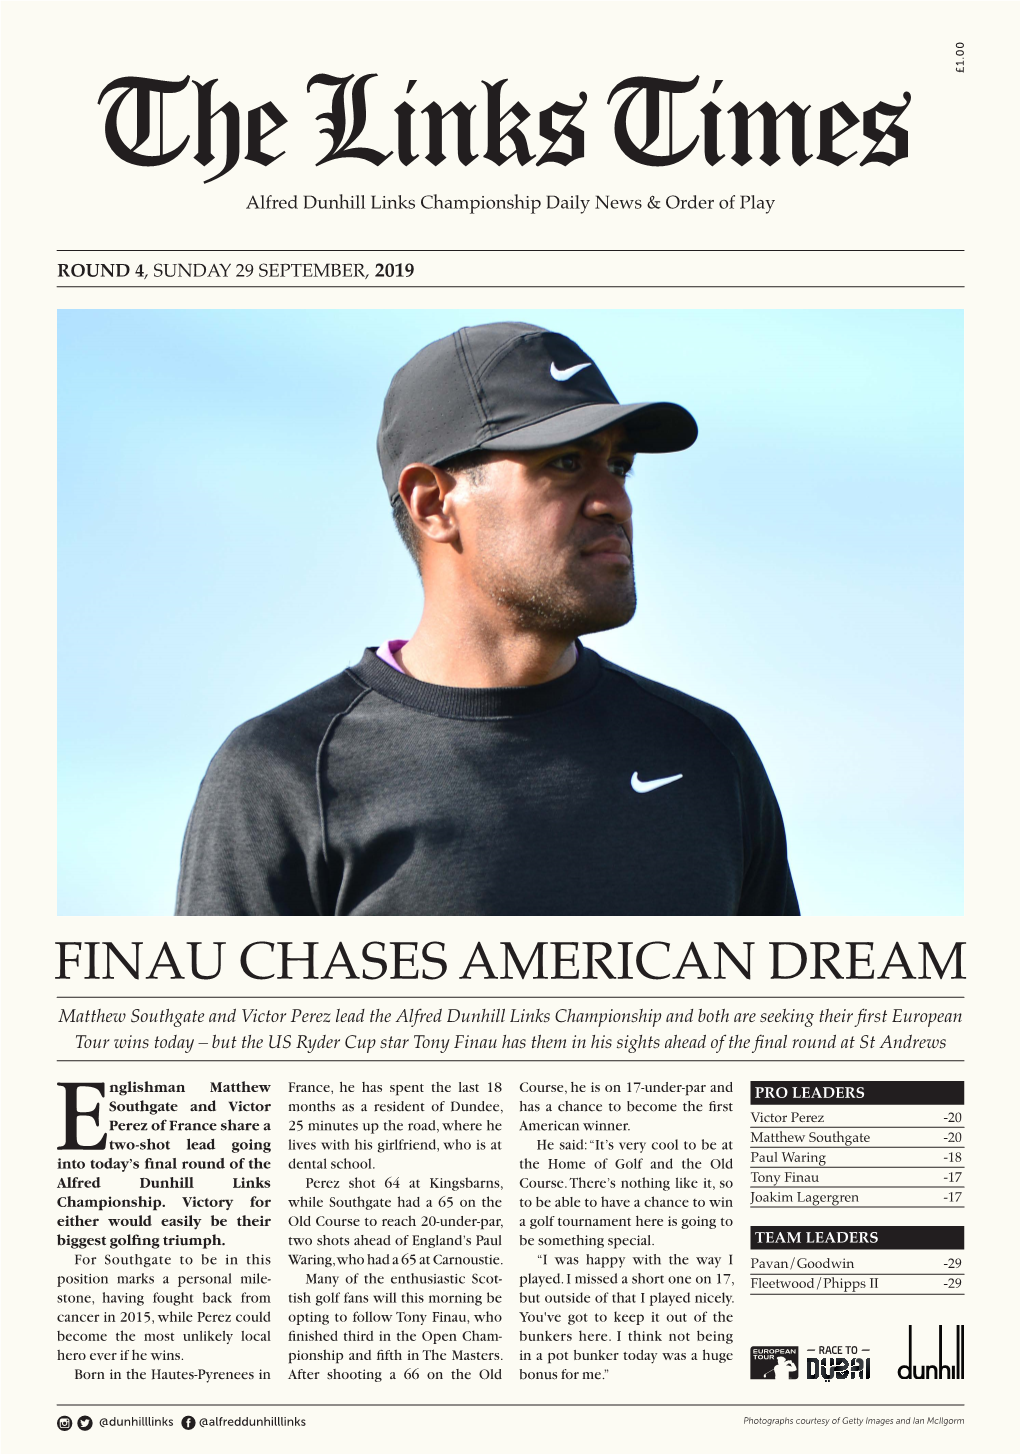 FINAU CHASES AMERICAN DREAM E @Dunhilllinks @Alfreddunhilllinks Hero Ever Ifhewins